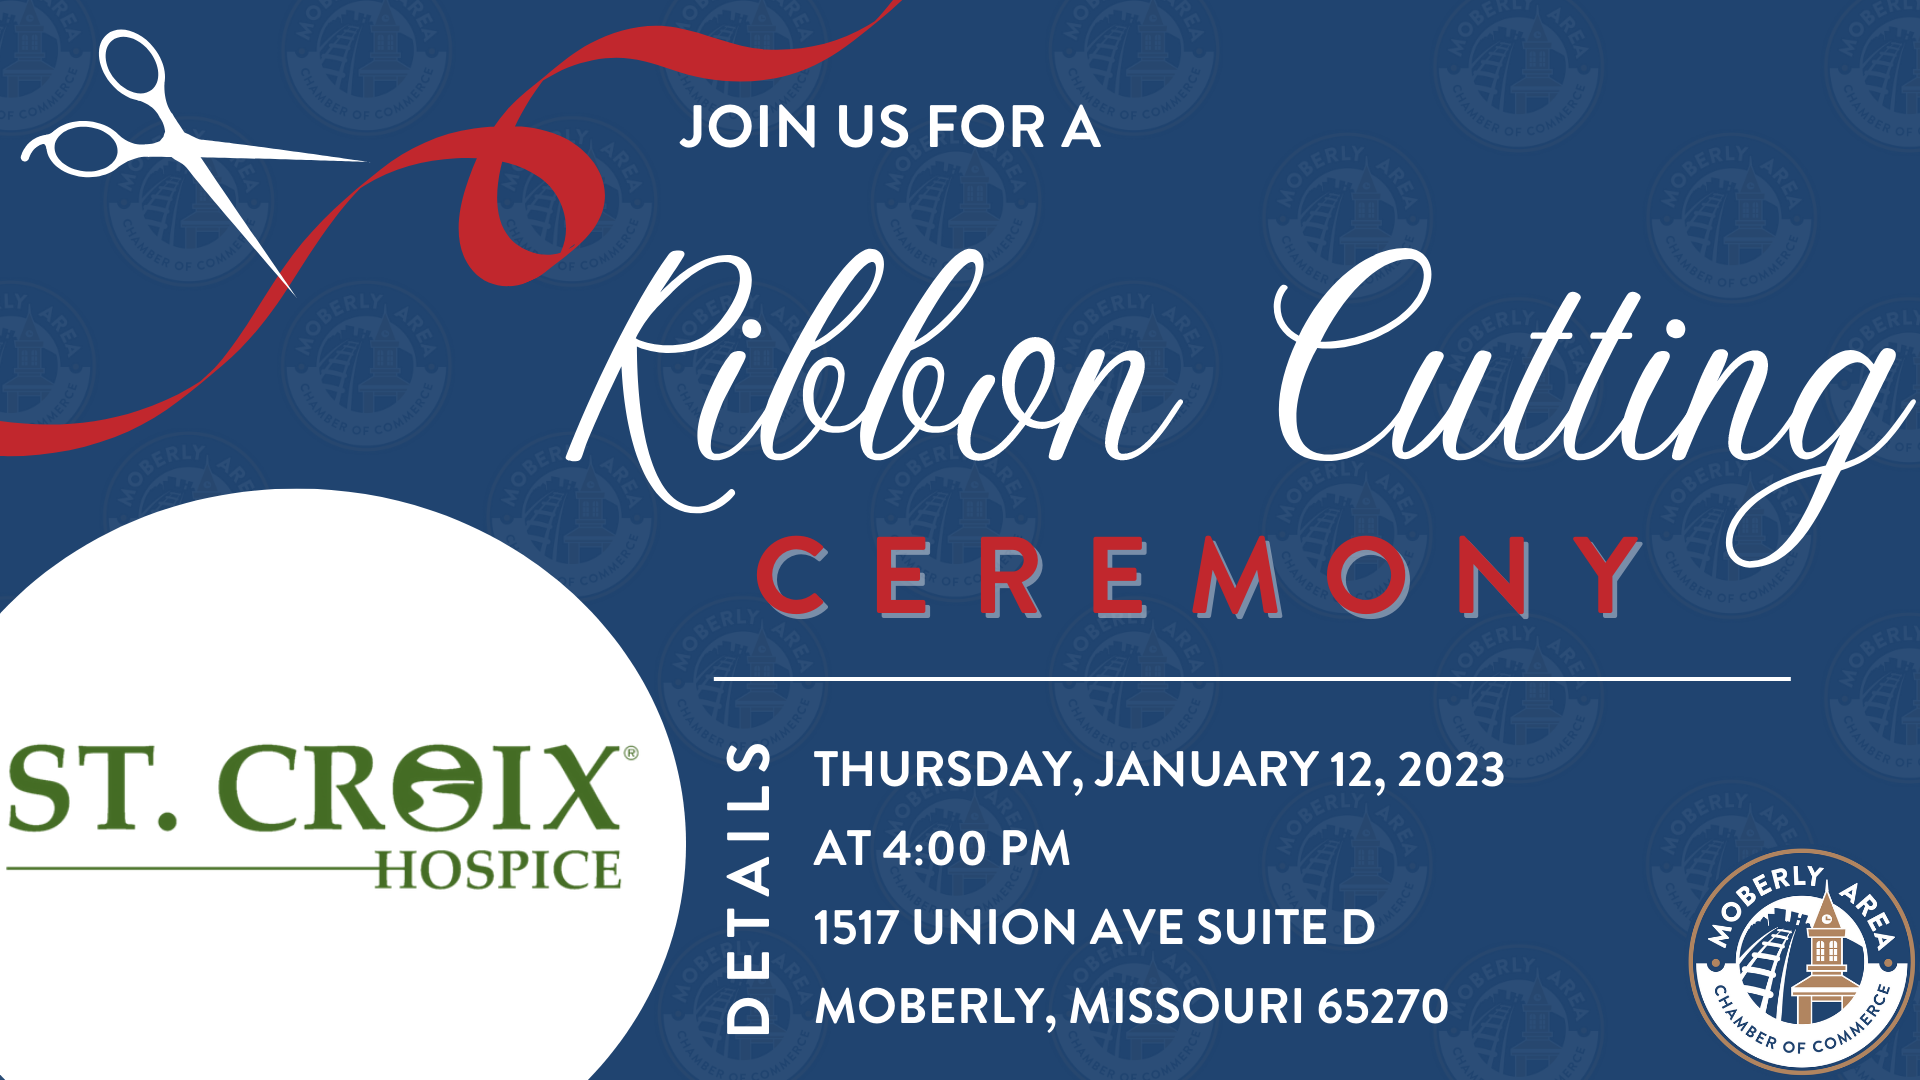 <h1 class="tribe-events-single-event-title">St Croix Hospice Ribbon Cutting</h1>